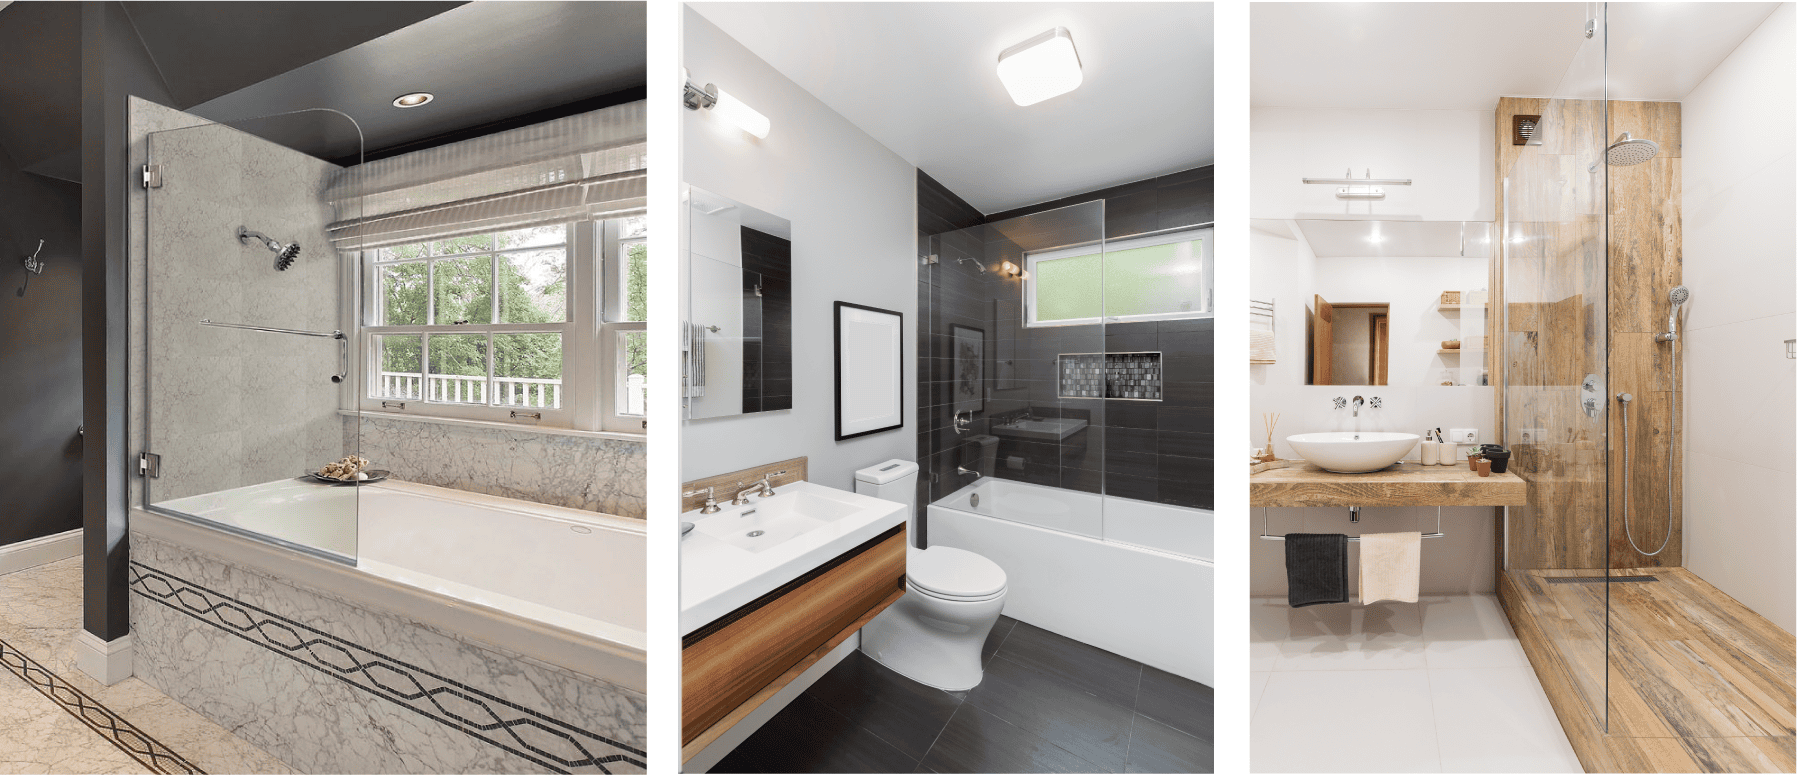 A collection of images presenting a bathroom equipped with a shower doors, toilet, and sink.